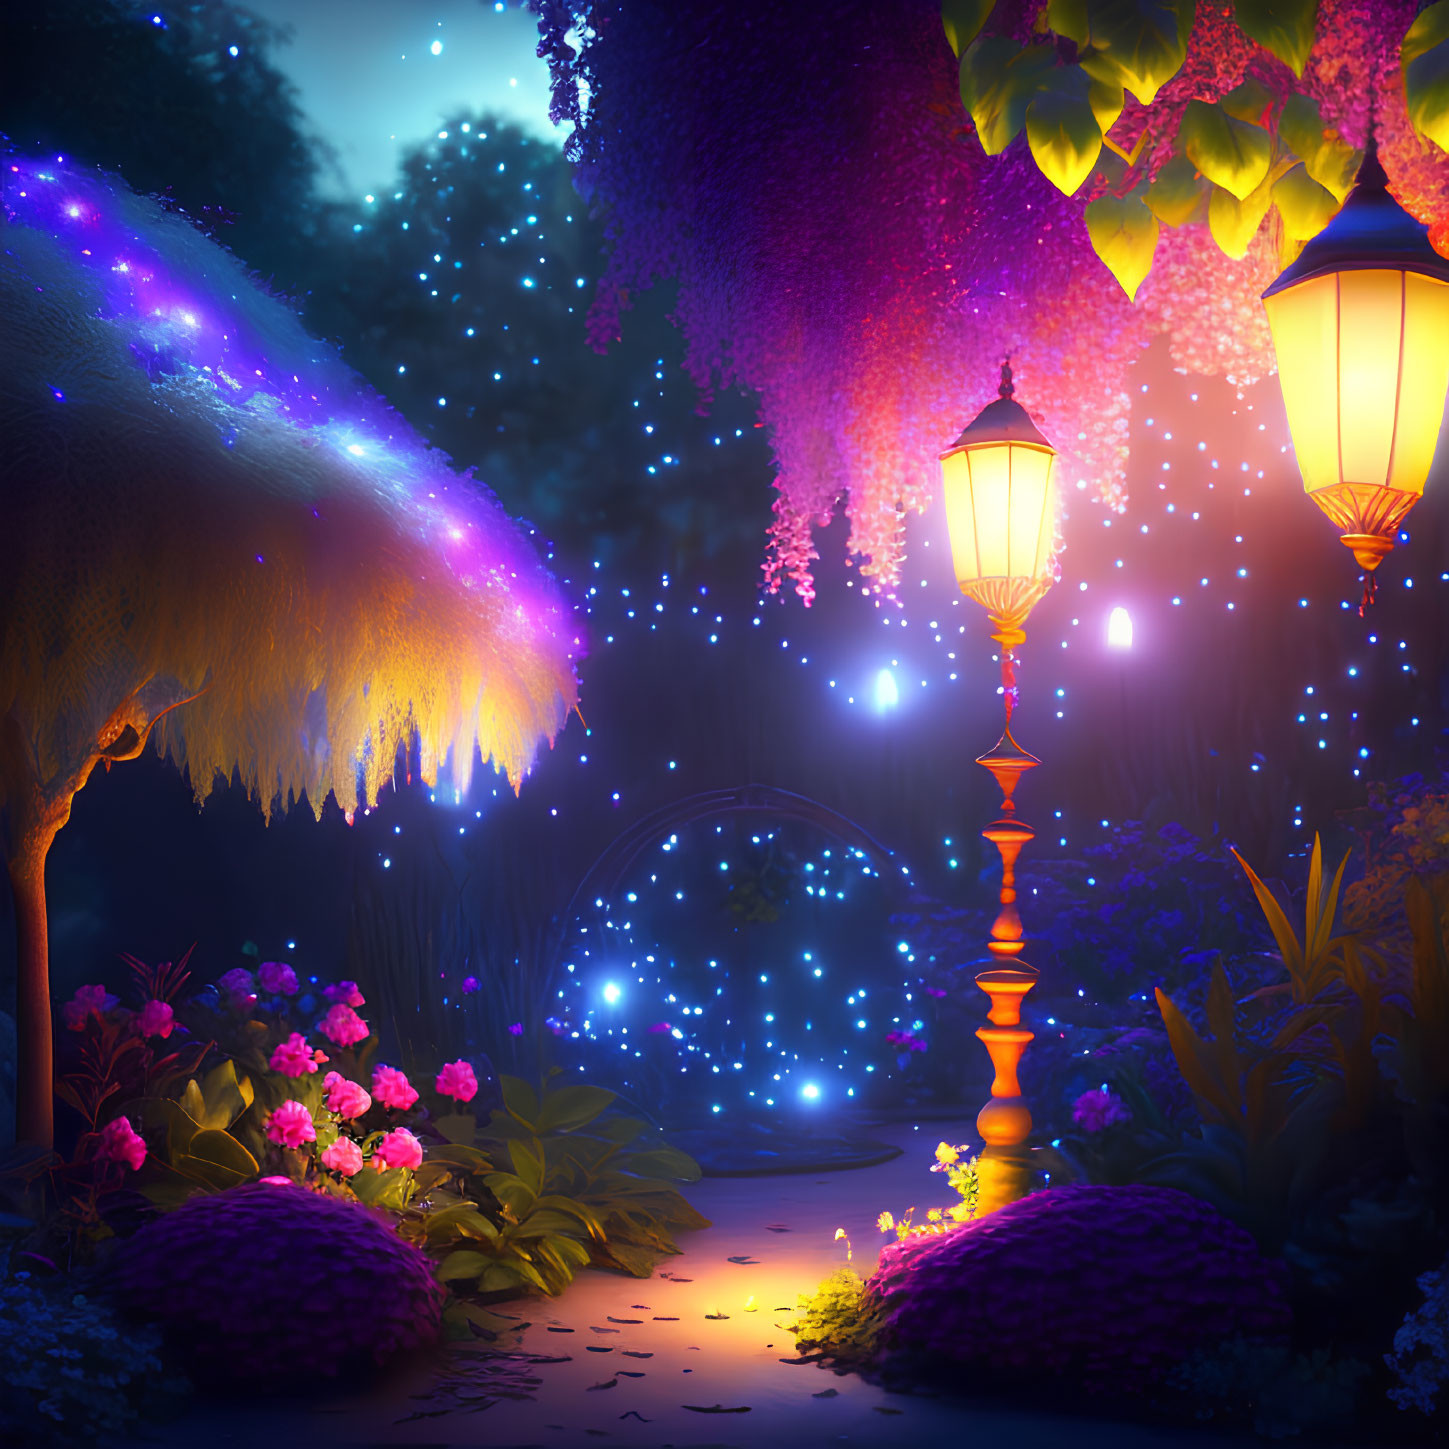 Enchanting night garden with glowing lanterns, starry sky, magical archway, flowers,